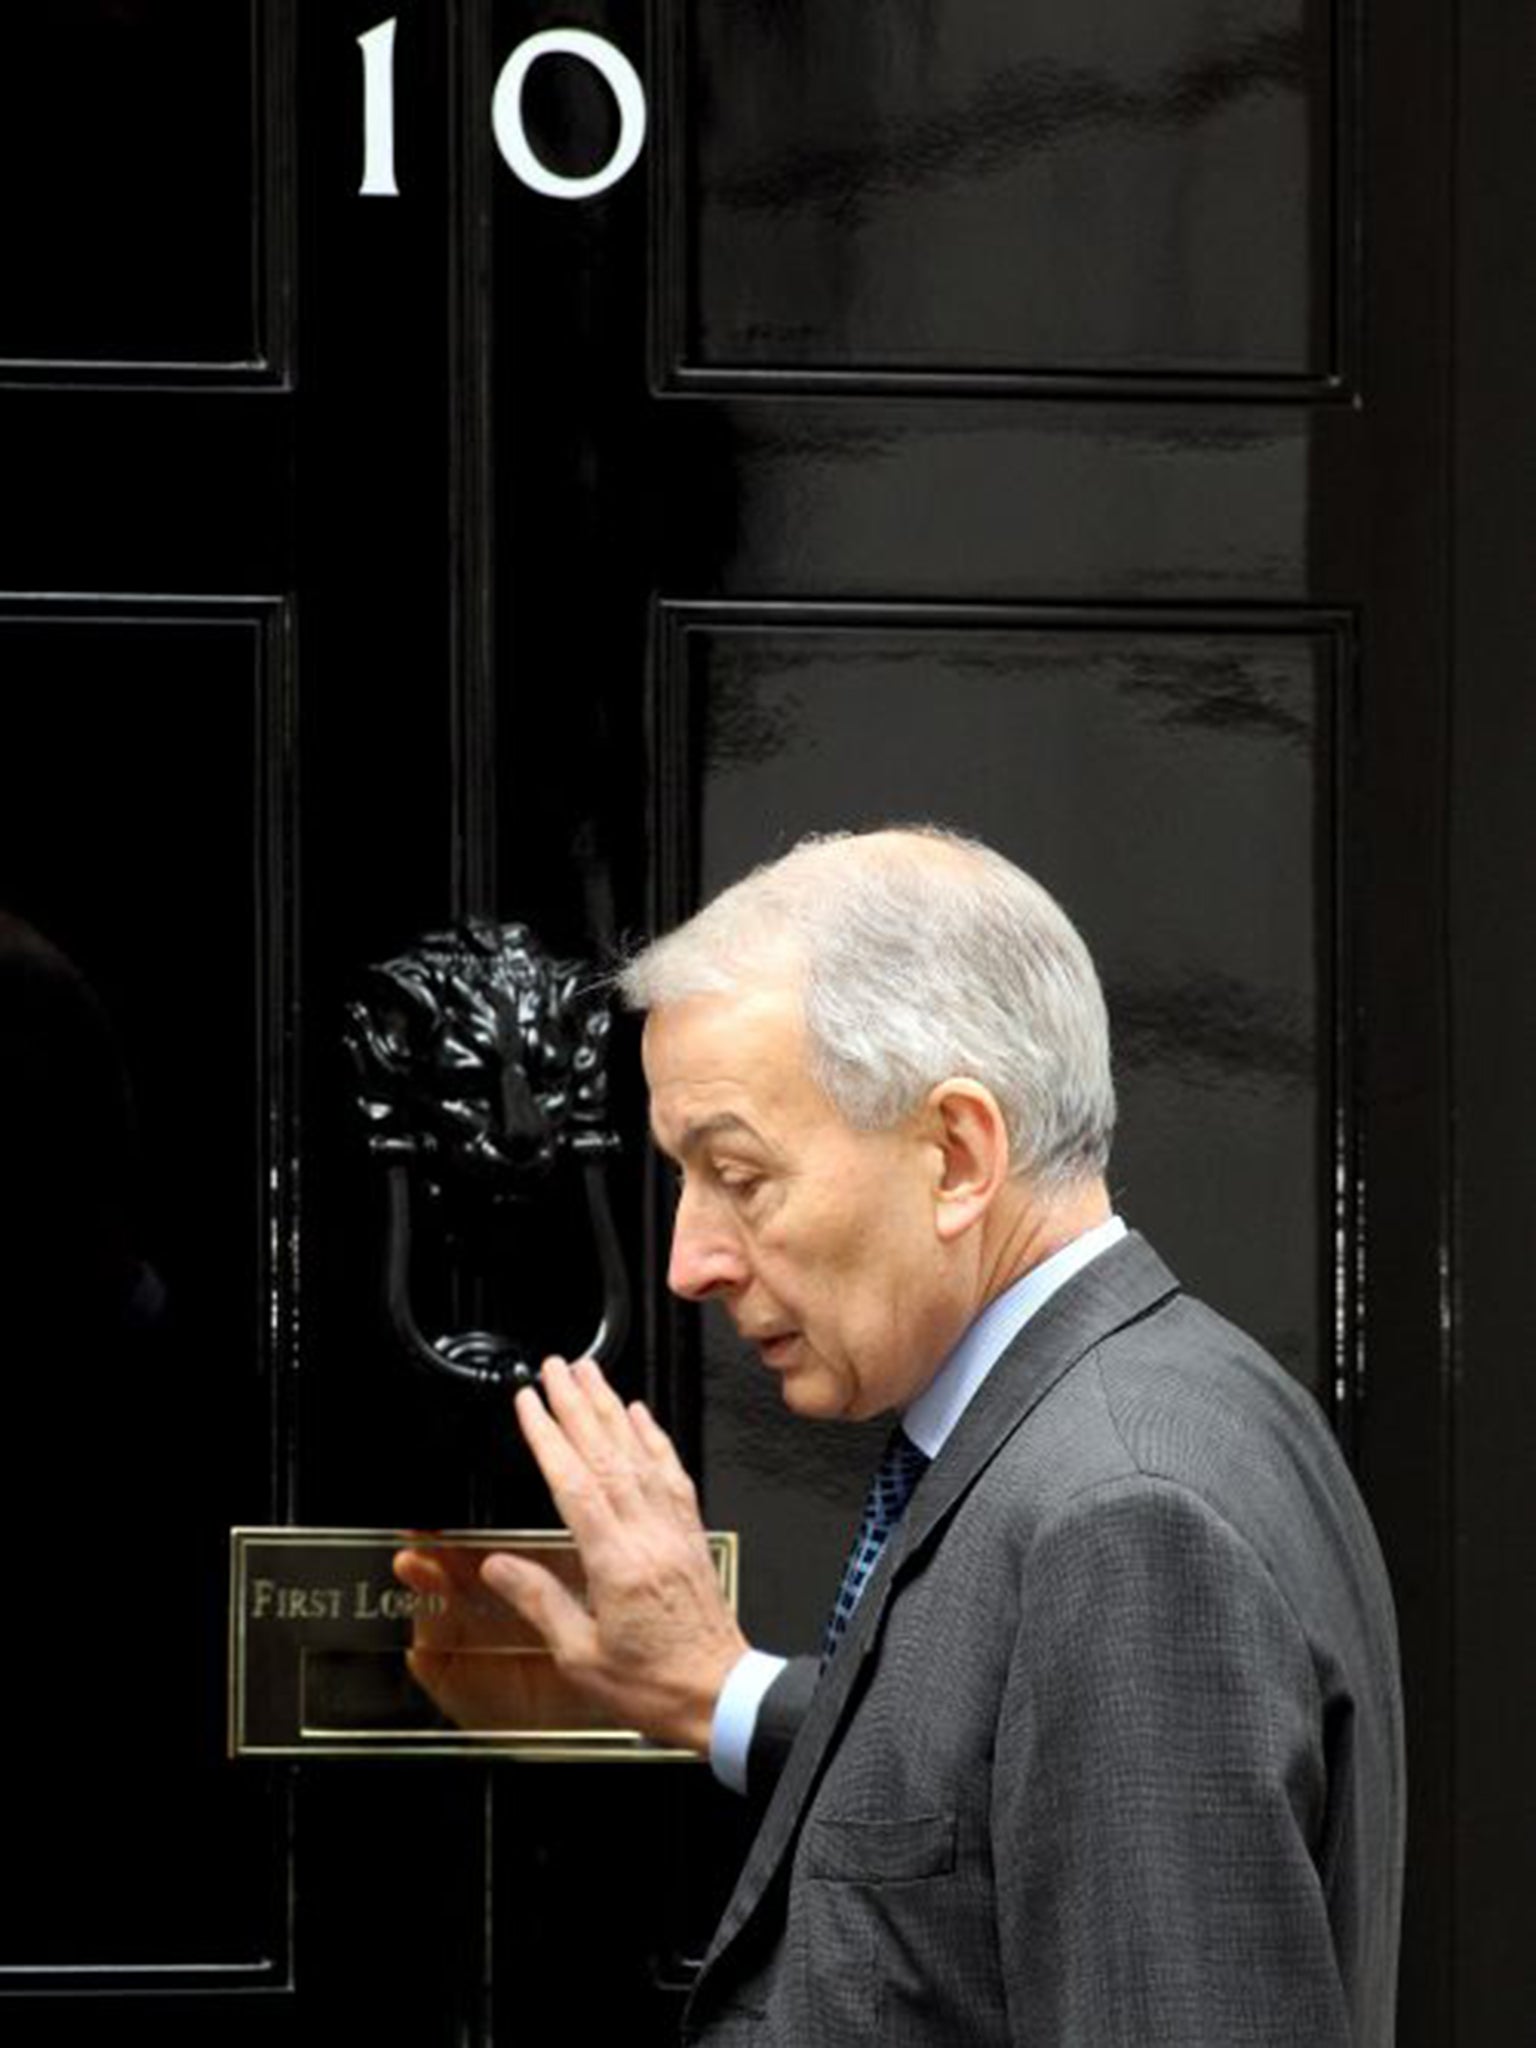 Frank Field's incendiary report into delivery company Hermes was sent to Theresa May